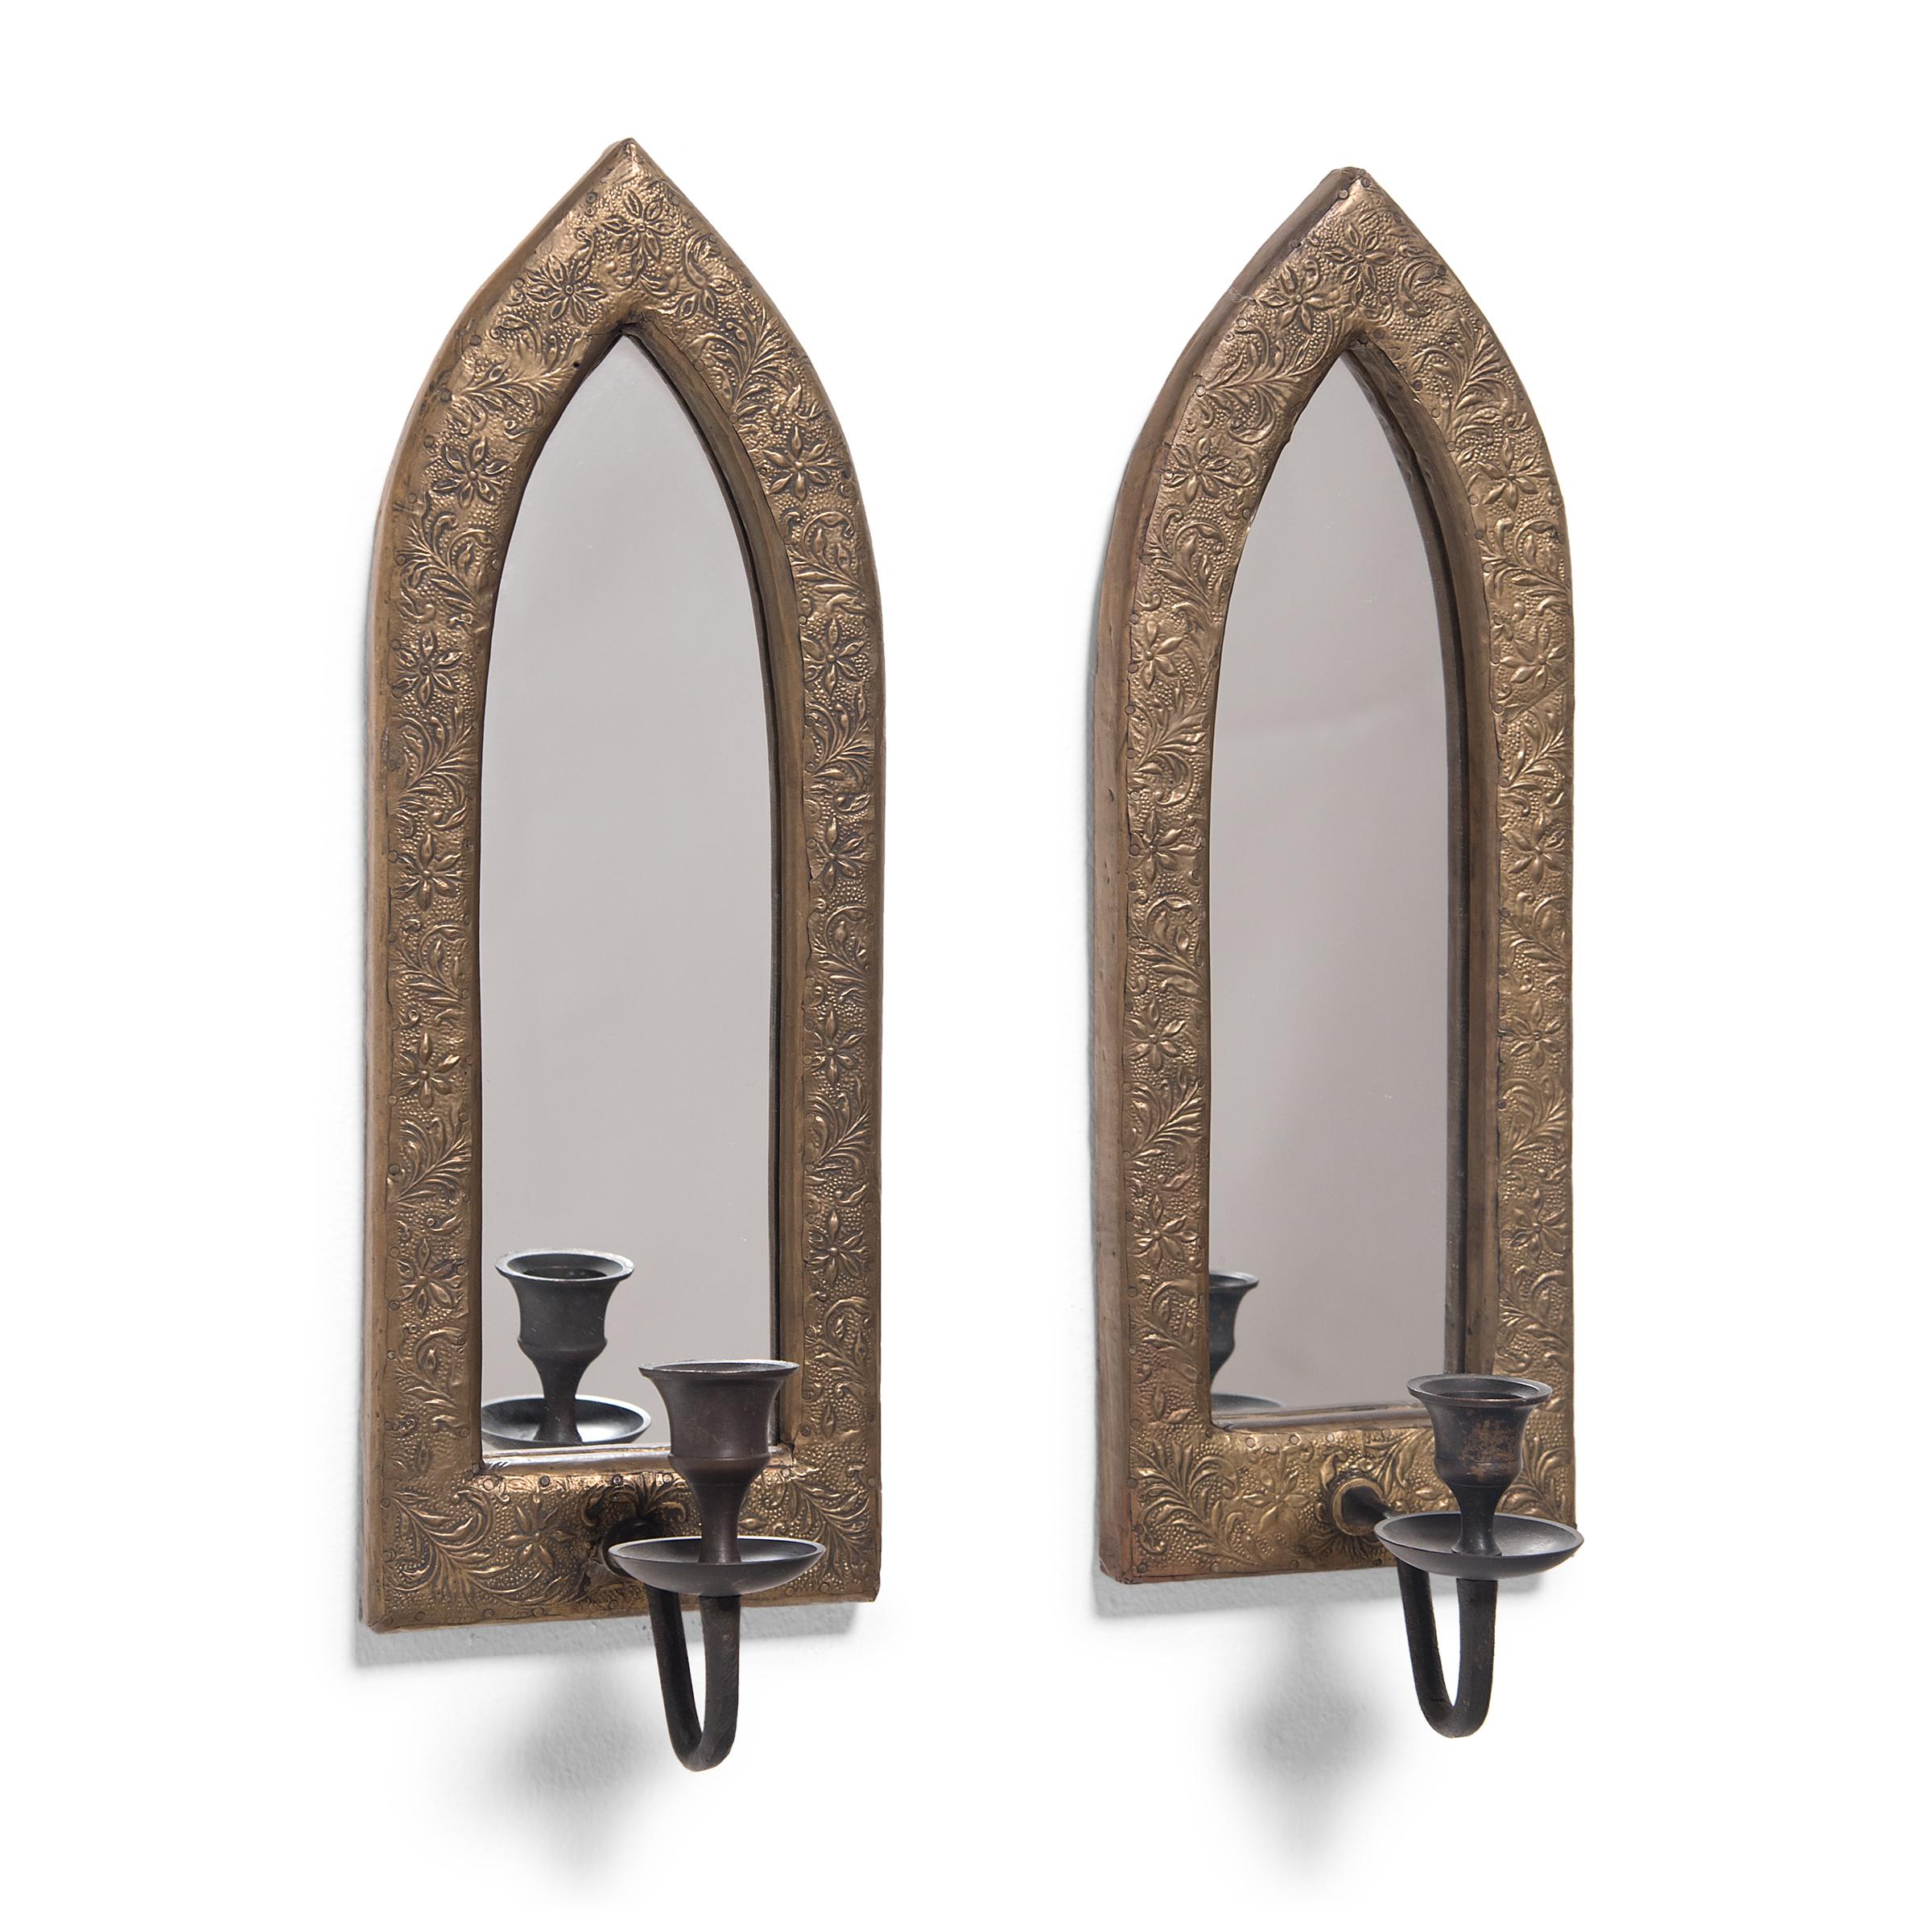 This pair of wall mounted candle sconces are designed in the style of the English Arts & Crafts movement and feature mirrored backings enclosed by arched frames. Shaped like Gothic lancet windows, the frames are made of wood with an outer layer of